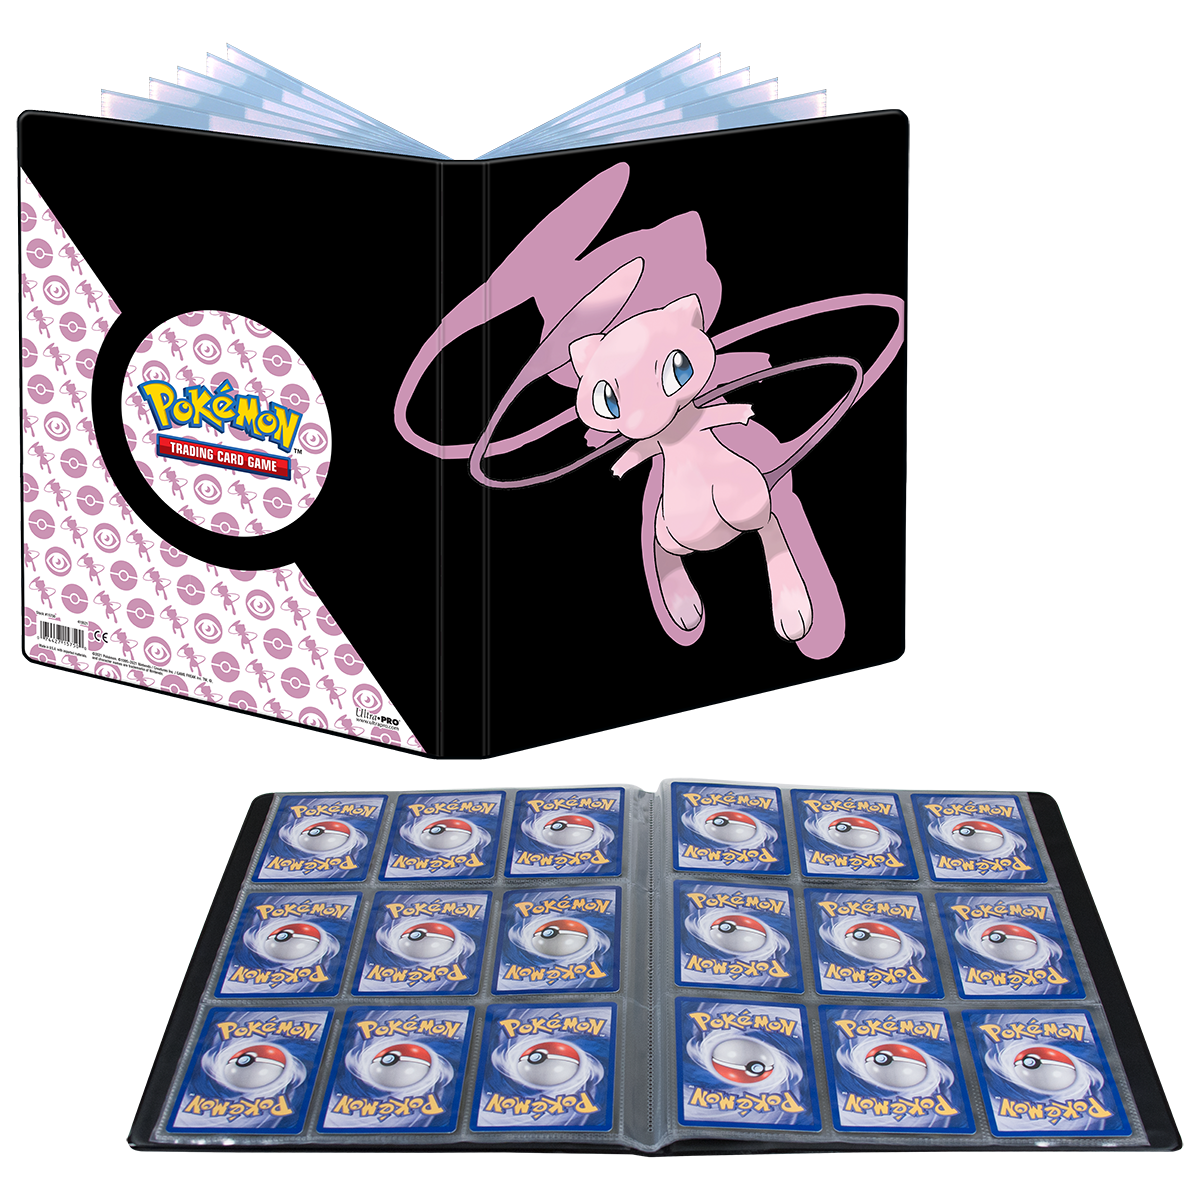 Check out this transparent Pokémon Mew PNG image